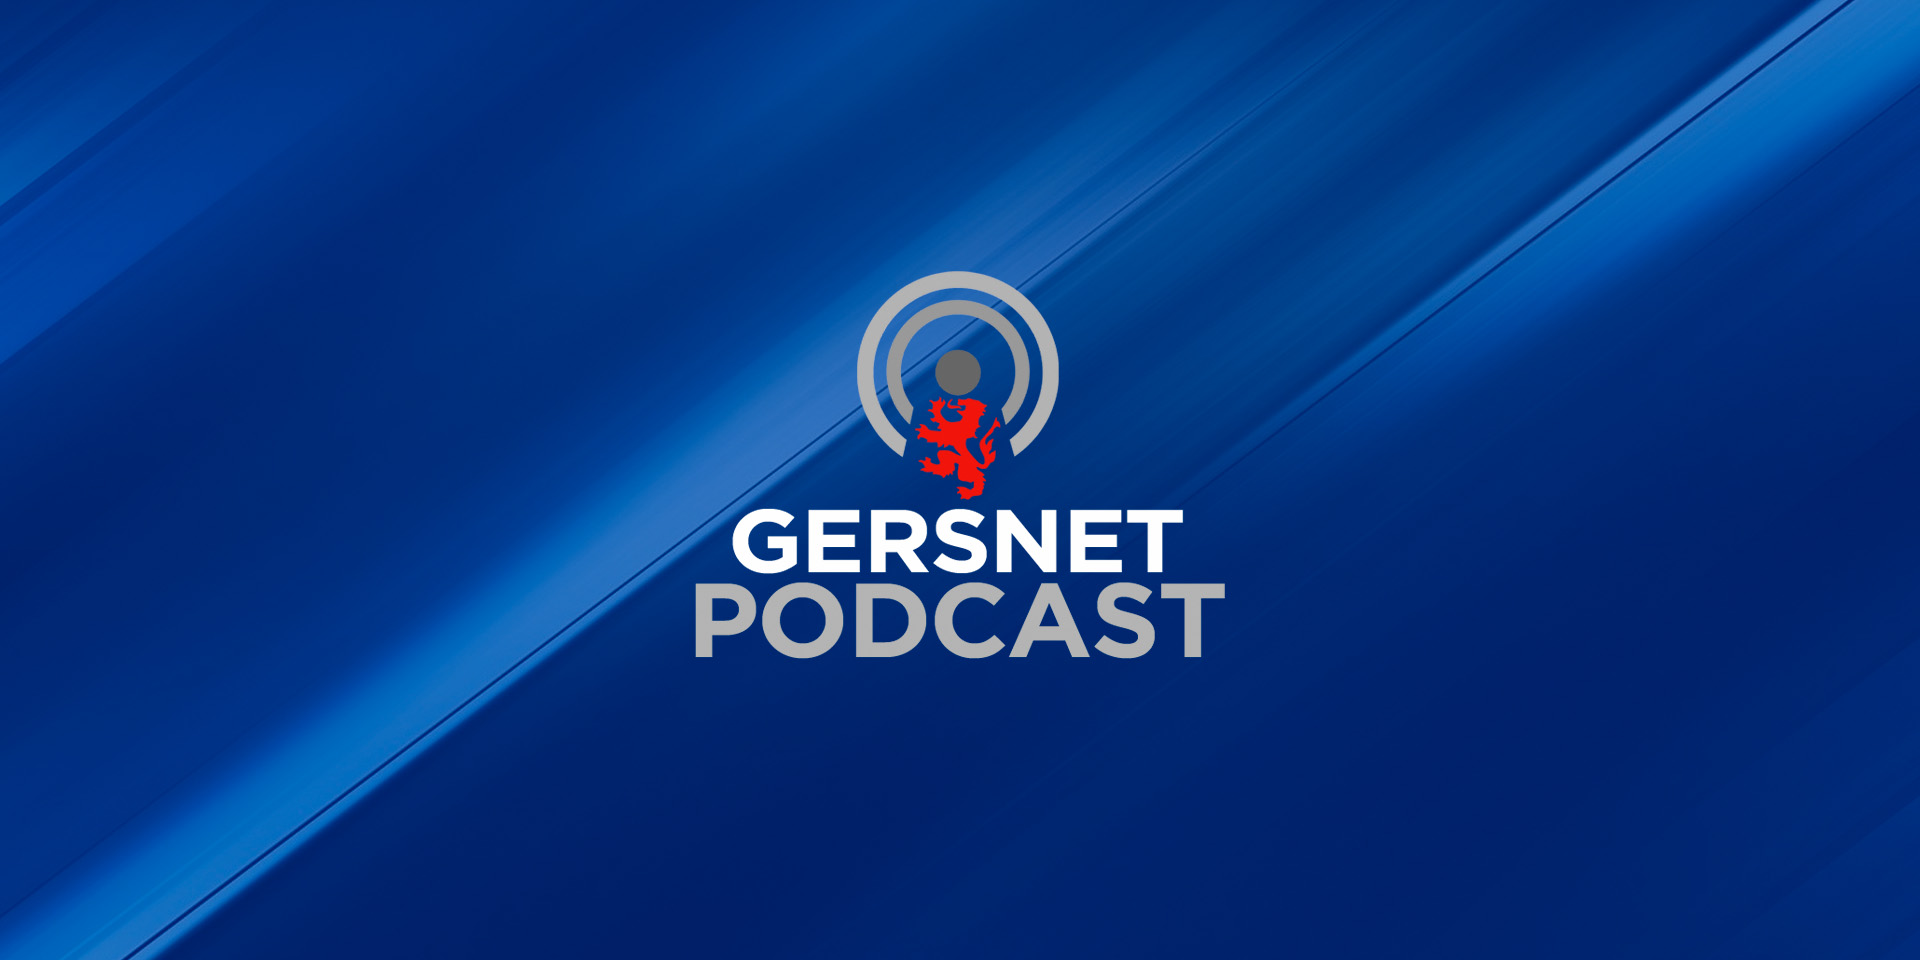 Gersnet Podcast 282 - Old Firm Failure